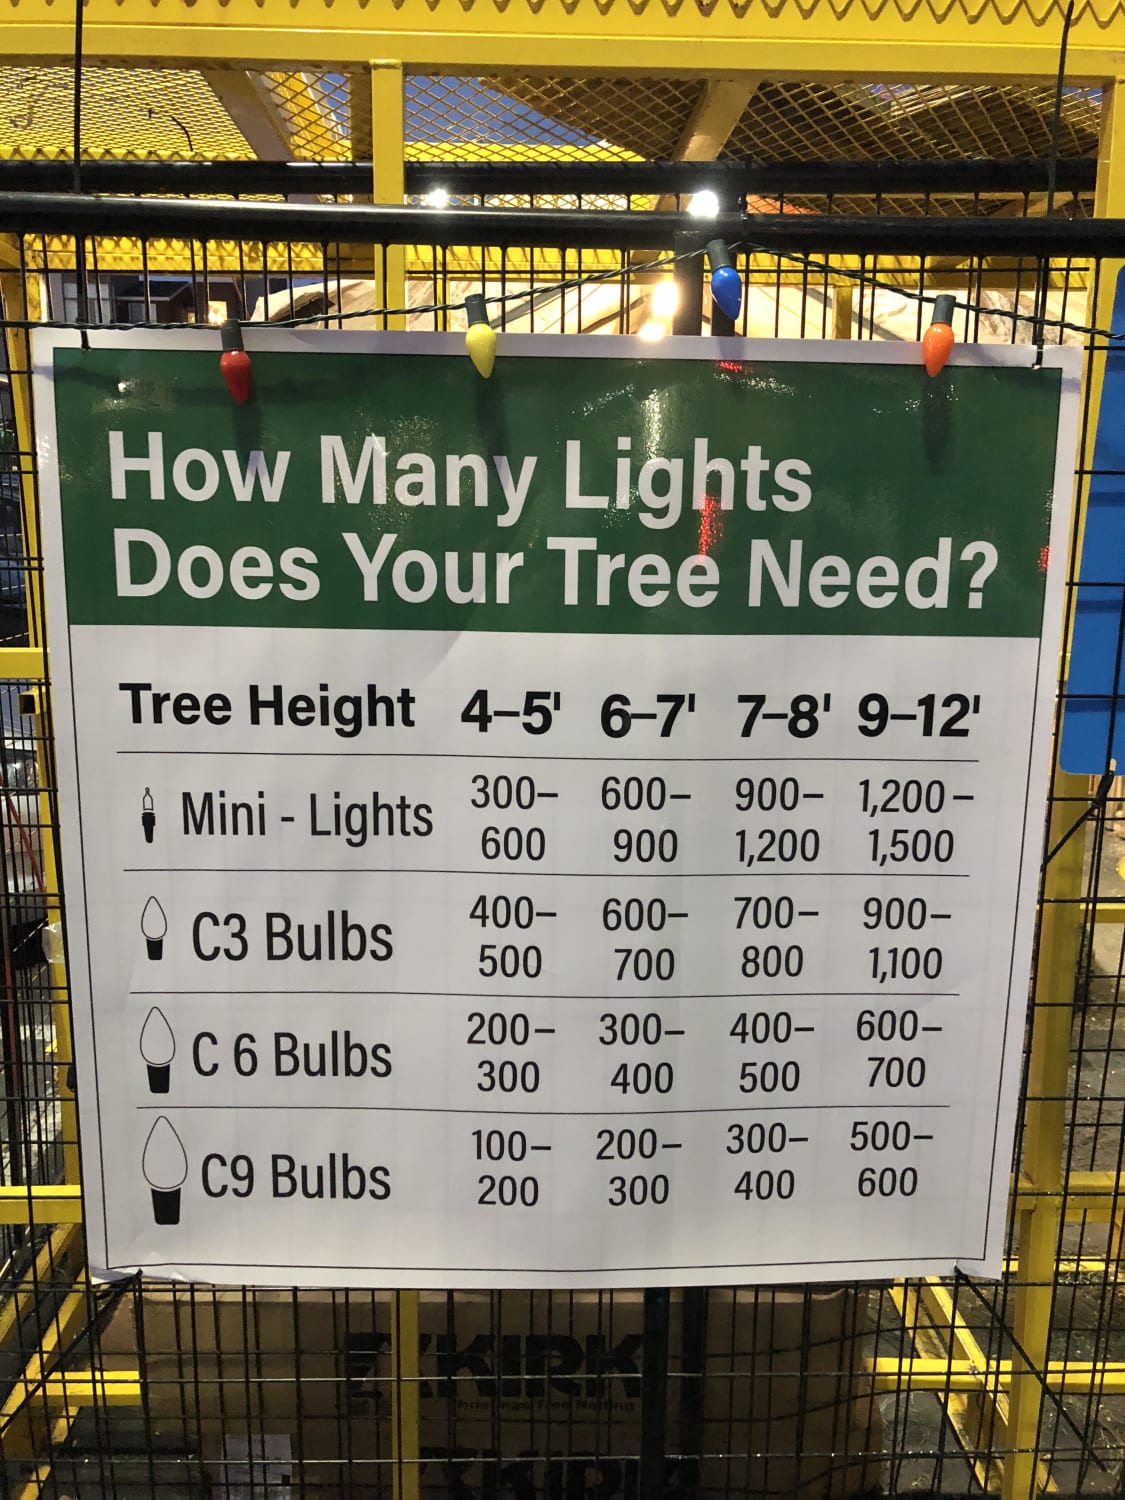 Guide found outside Home Depot showing how many Christmas lights are needed based on tree height and bulb size.